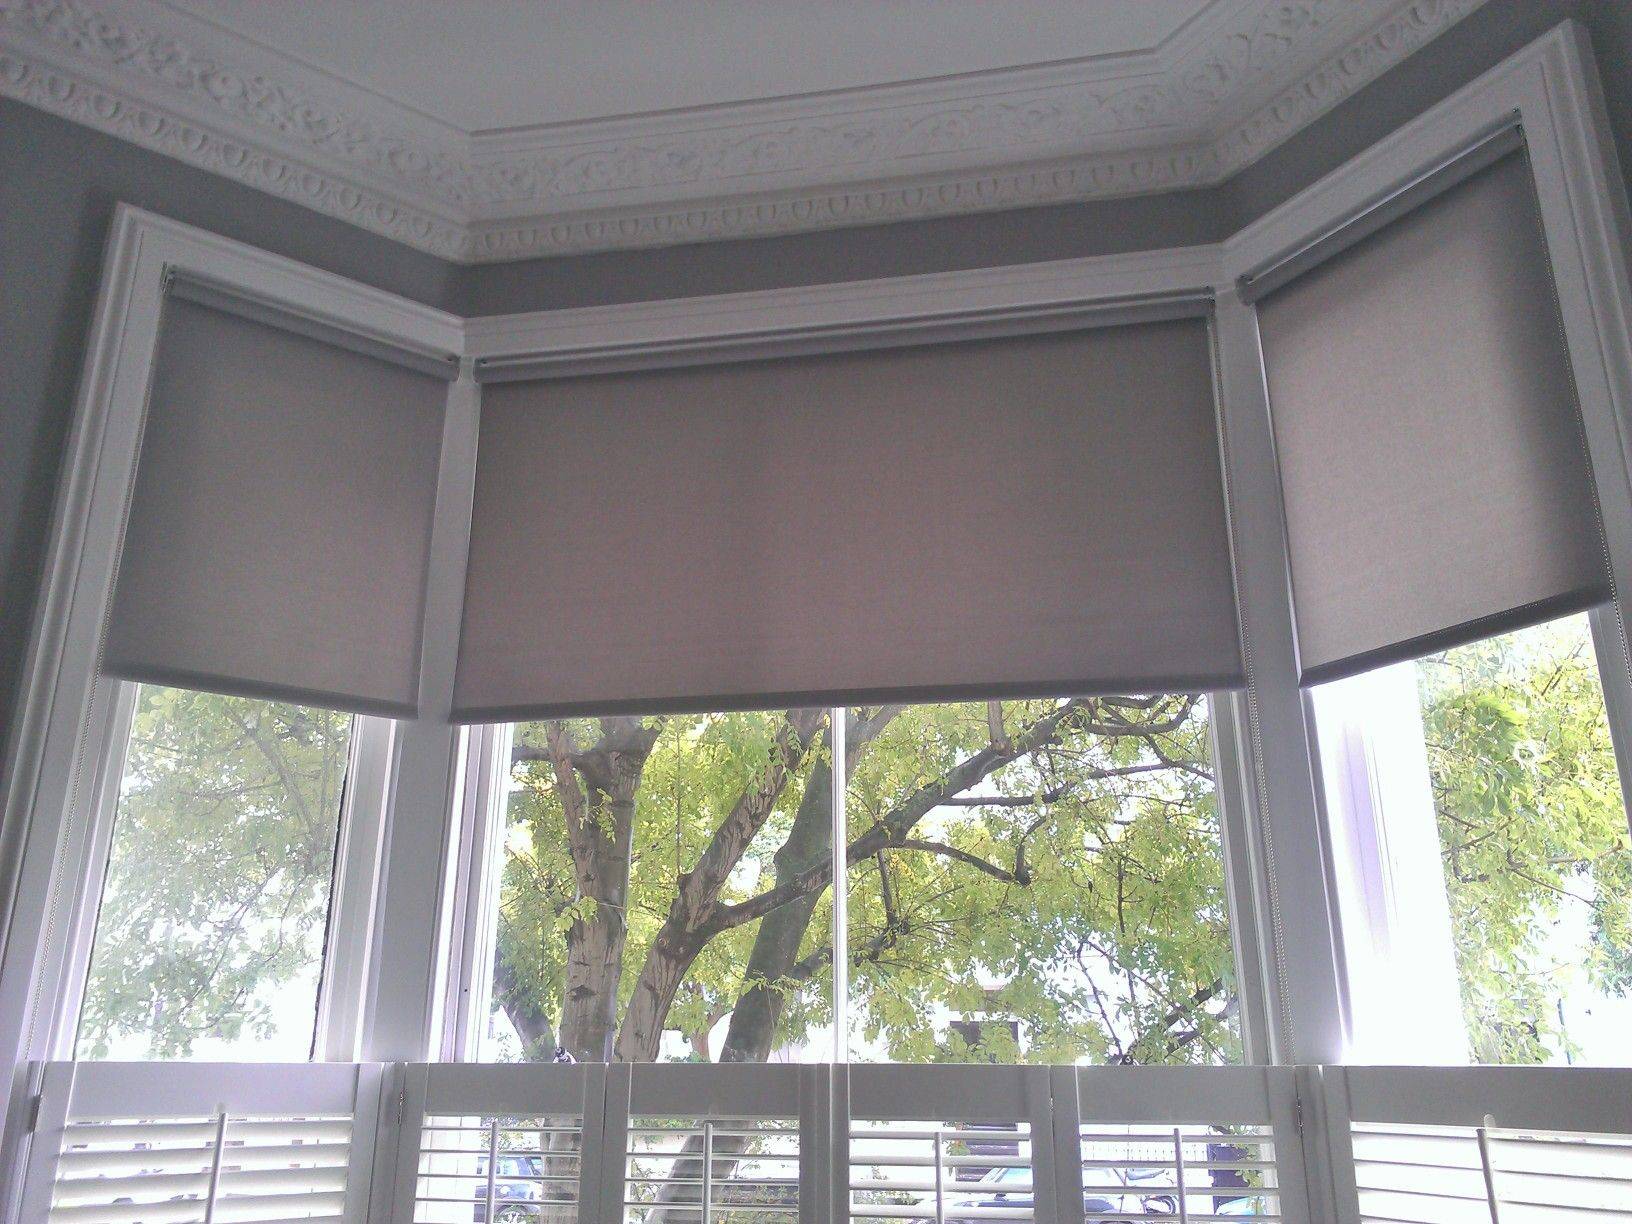 Letsdiskuss which is the best blinds for a bay window??